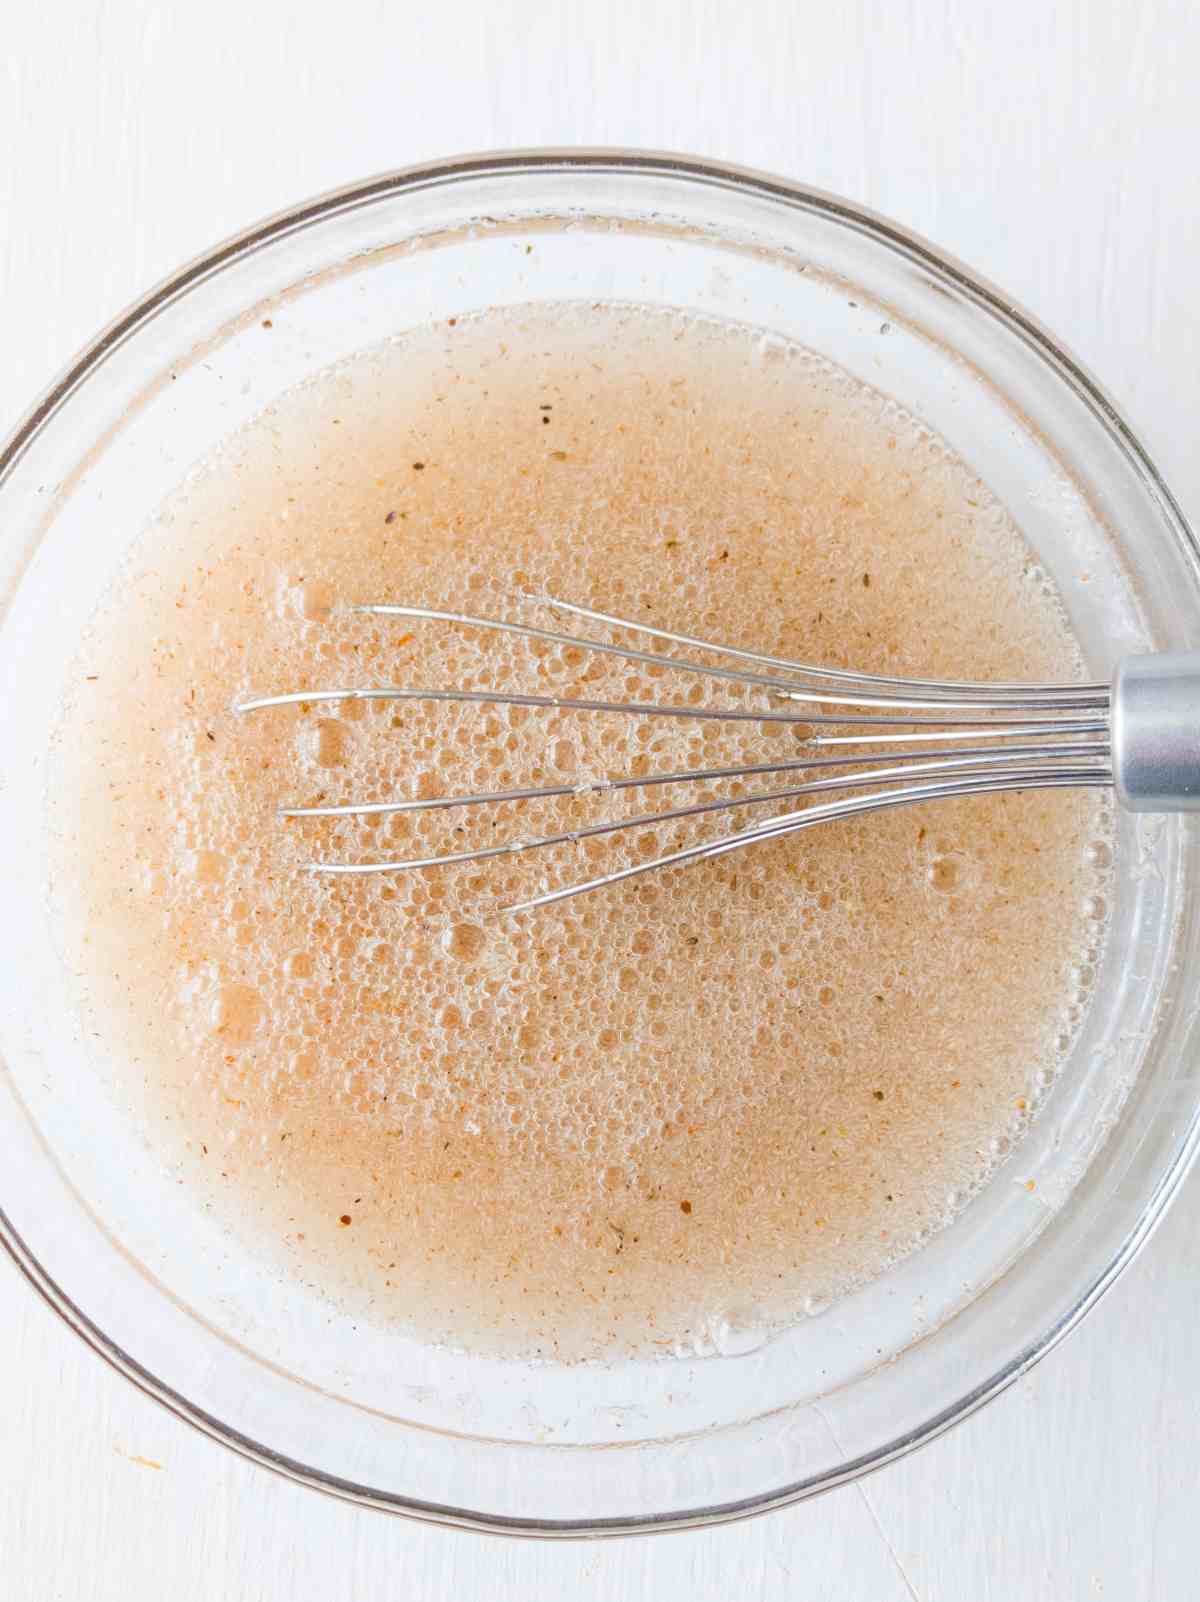 Psyllium husk mixed with water in a glass bowl and a whisk.